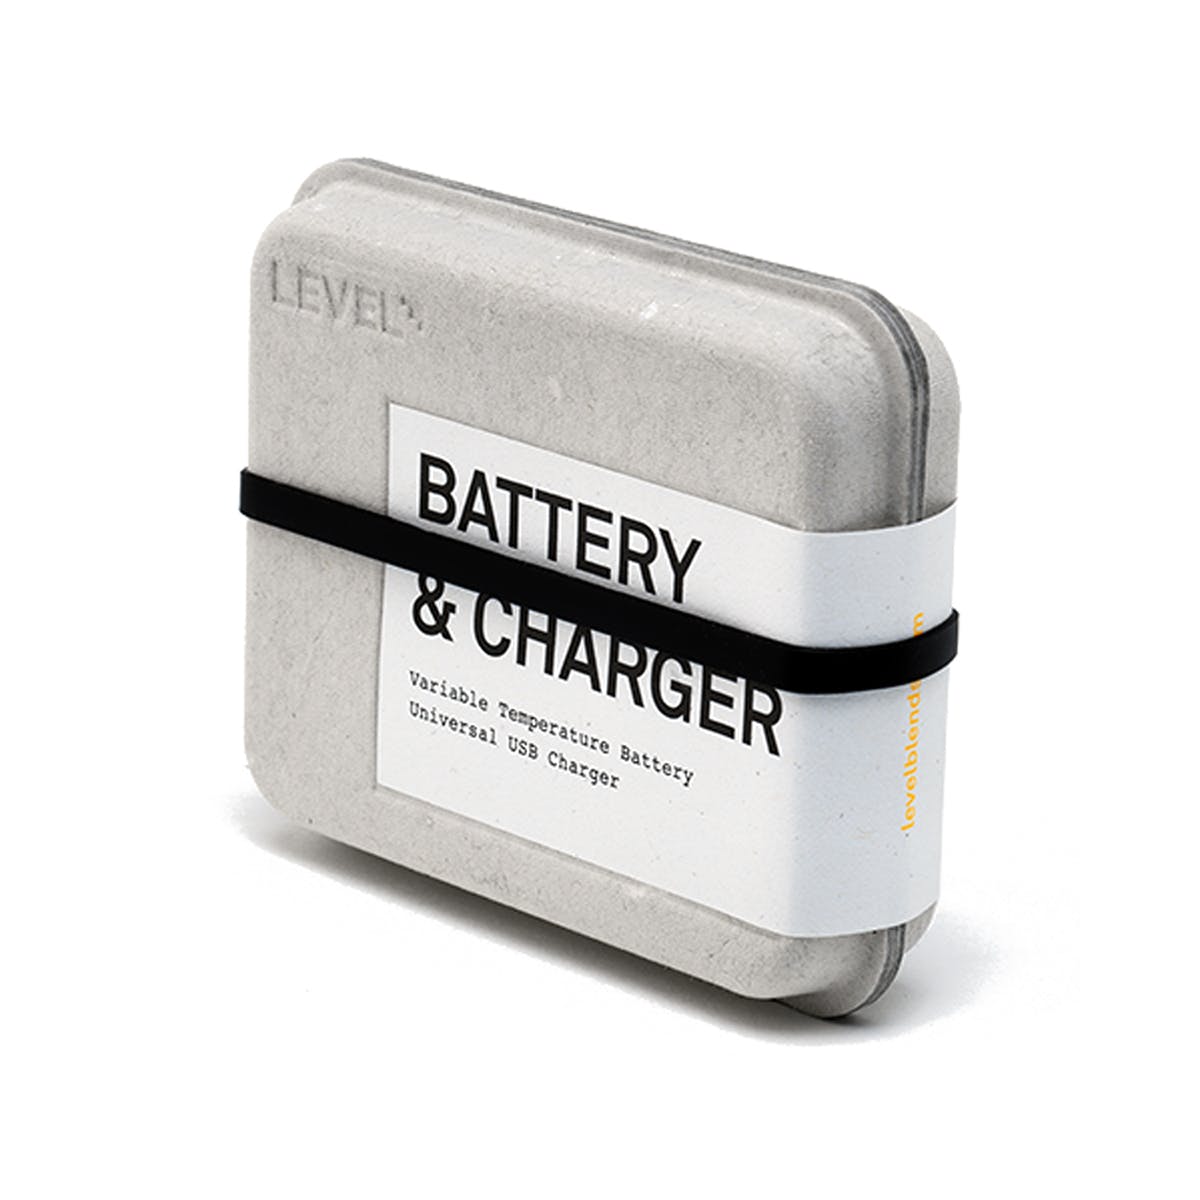 Level Variable Temperature Battery and Charger